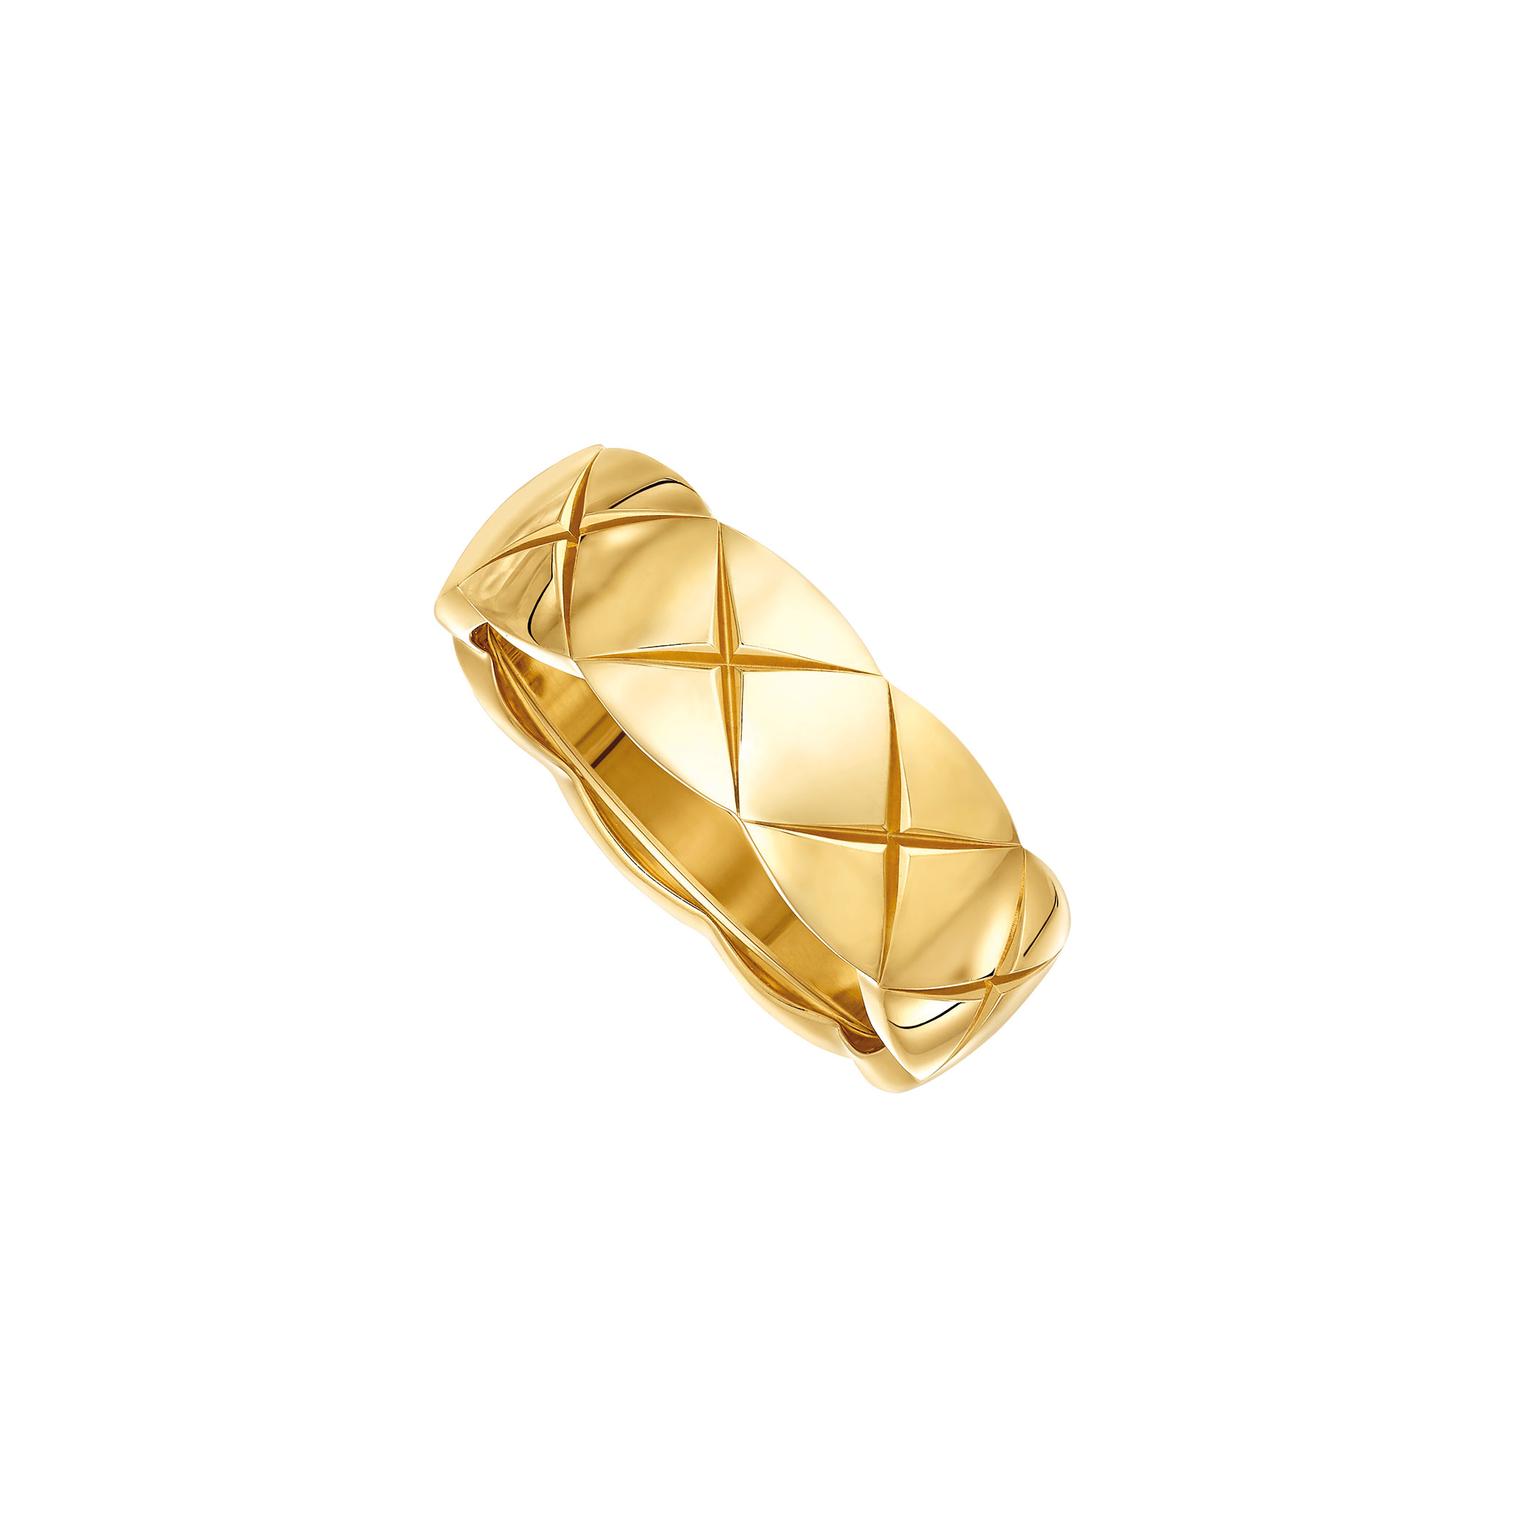 Super replica of Chanel Coco Crush diamond ring 18k gold Although all  sellers claim their products are 11 or authentic quality but actually  most of them are lowmedium end Click the link